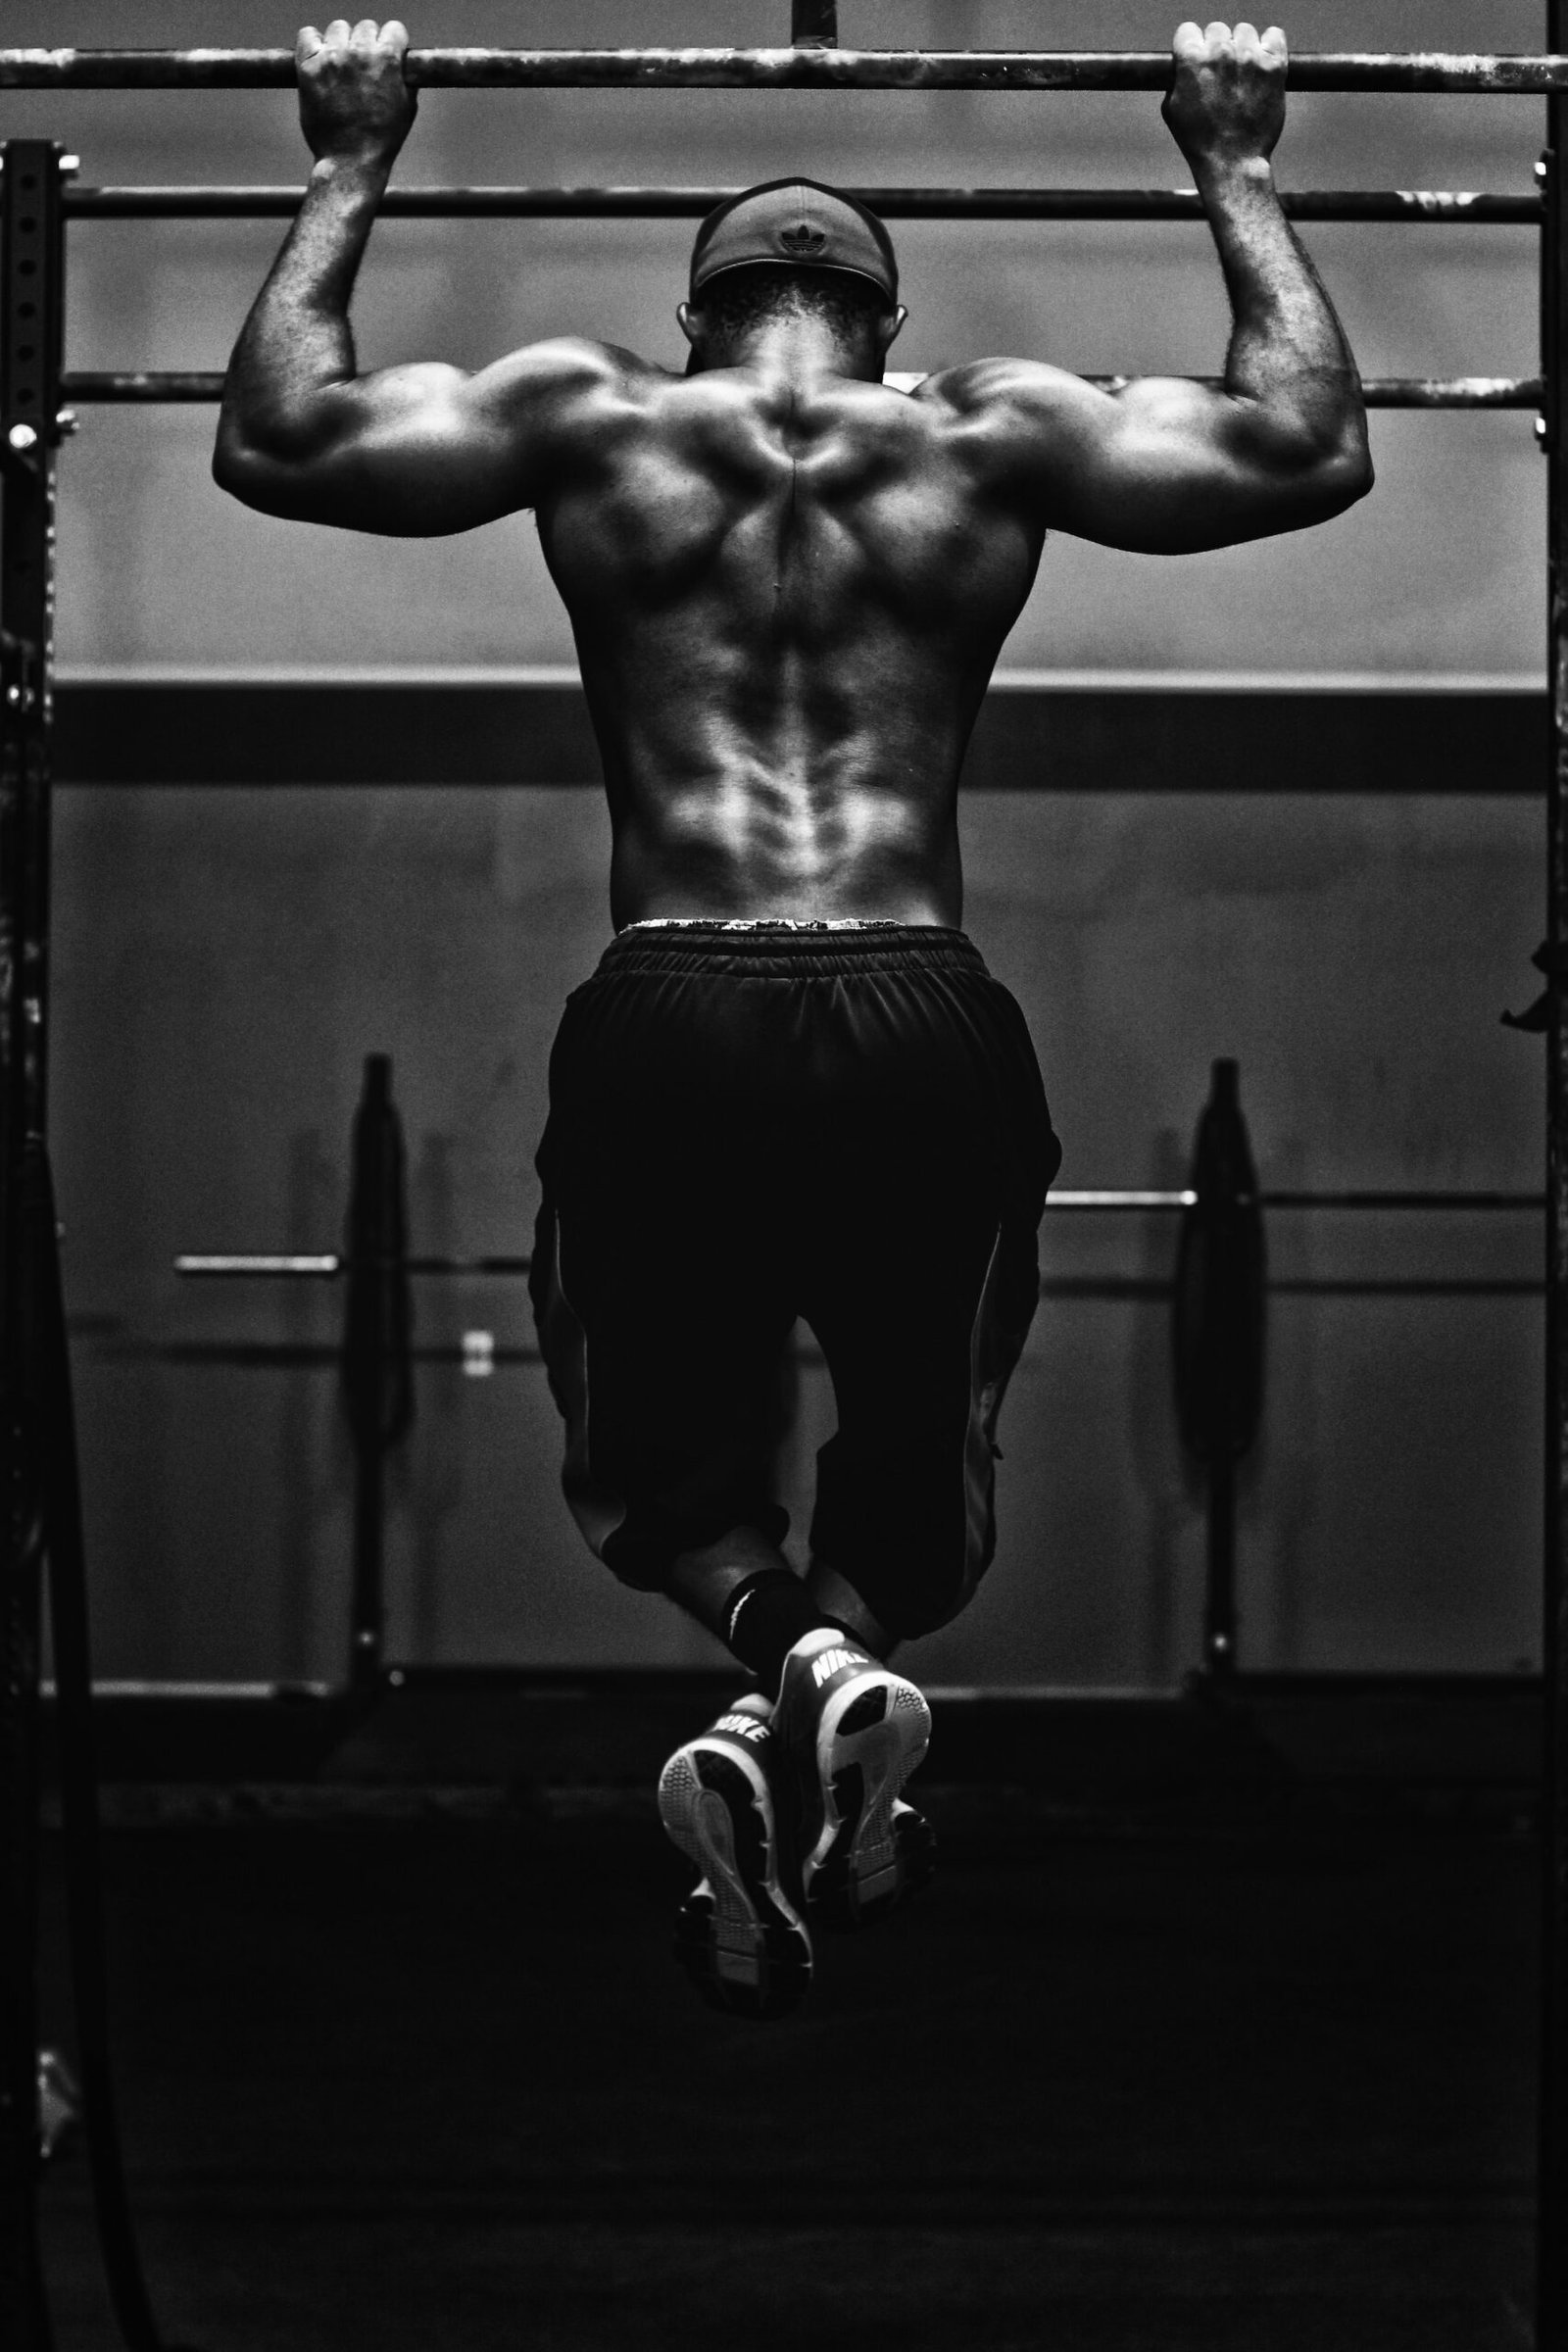 Barbell Pull Up Excellence Your Ultimate Guide to Strength, Form, and Safety